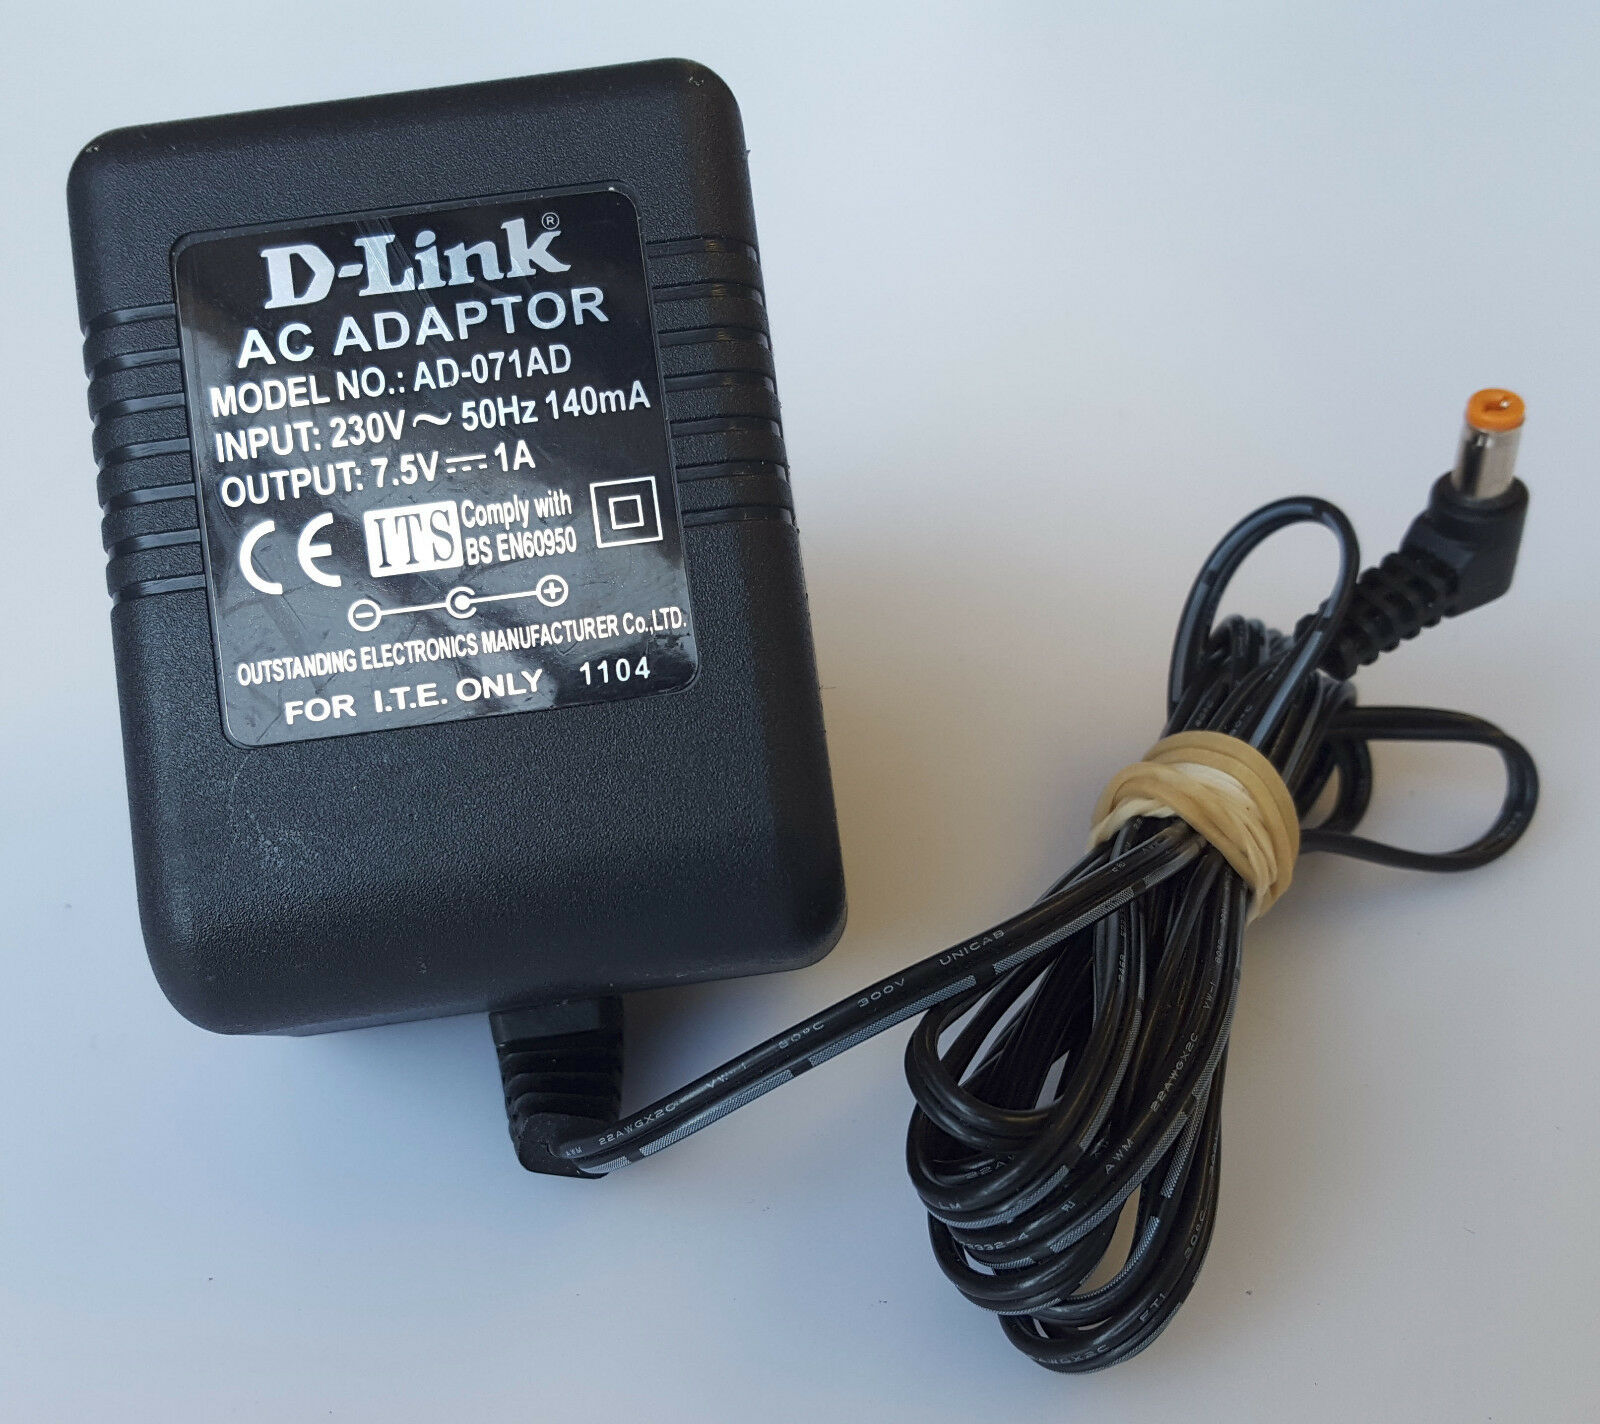 *Brand NEW*D-LINK AD-071AD 7.5V 1A AC/AC ADAPTER POWER SUPPLY